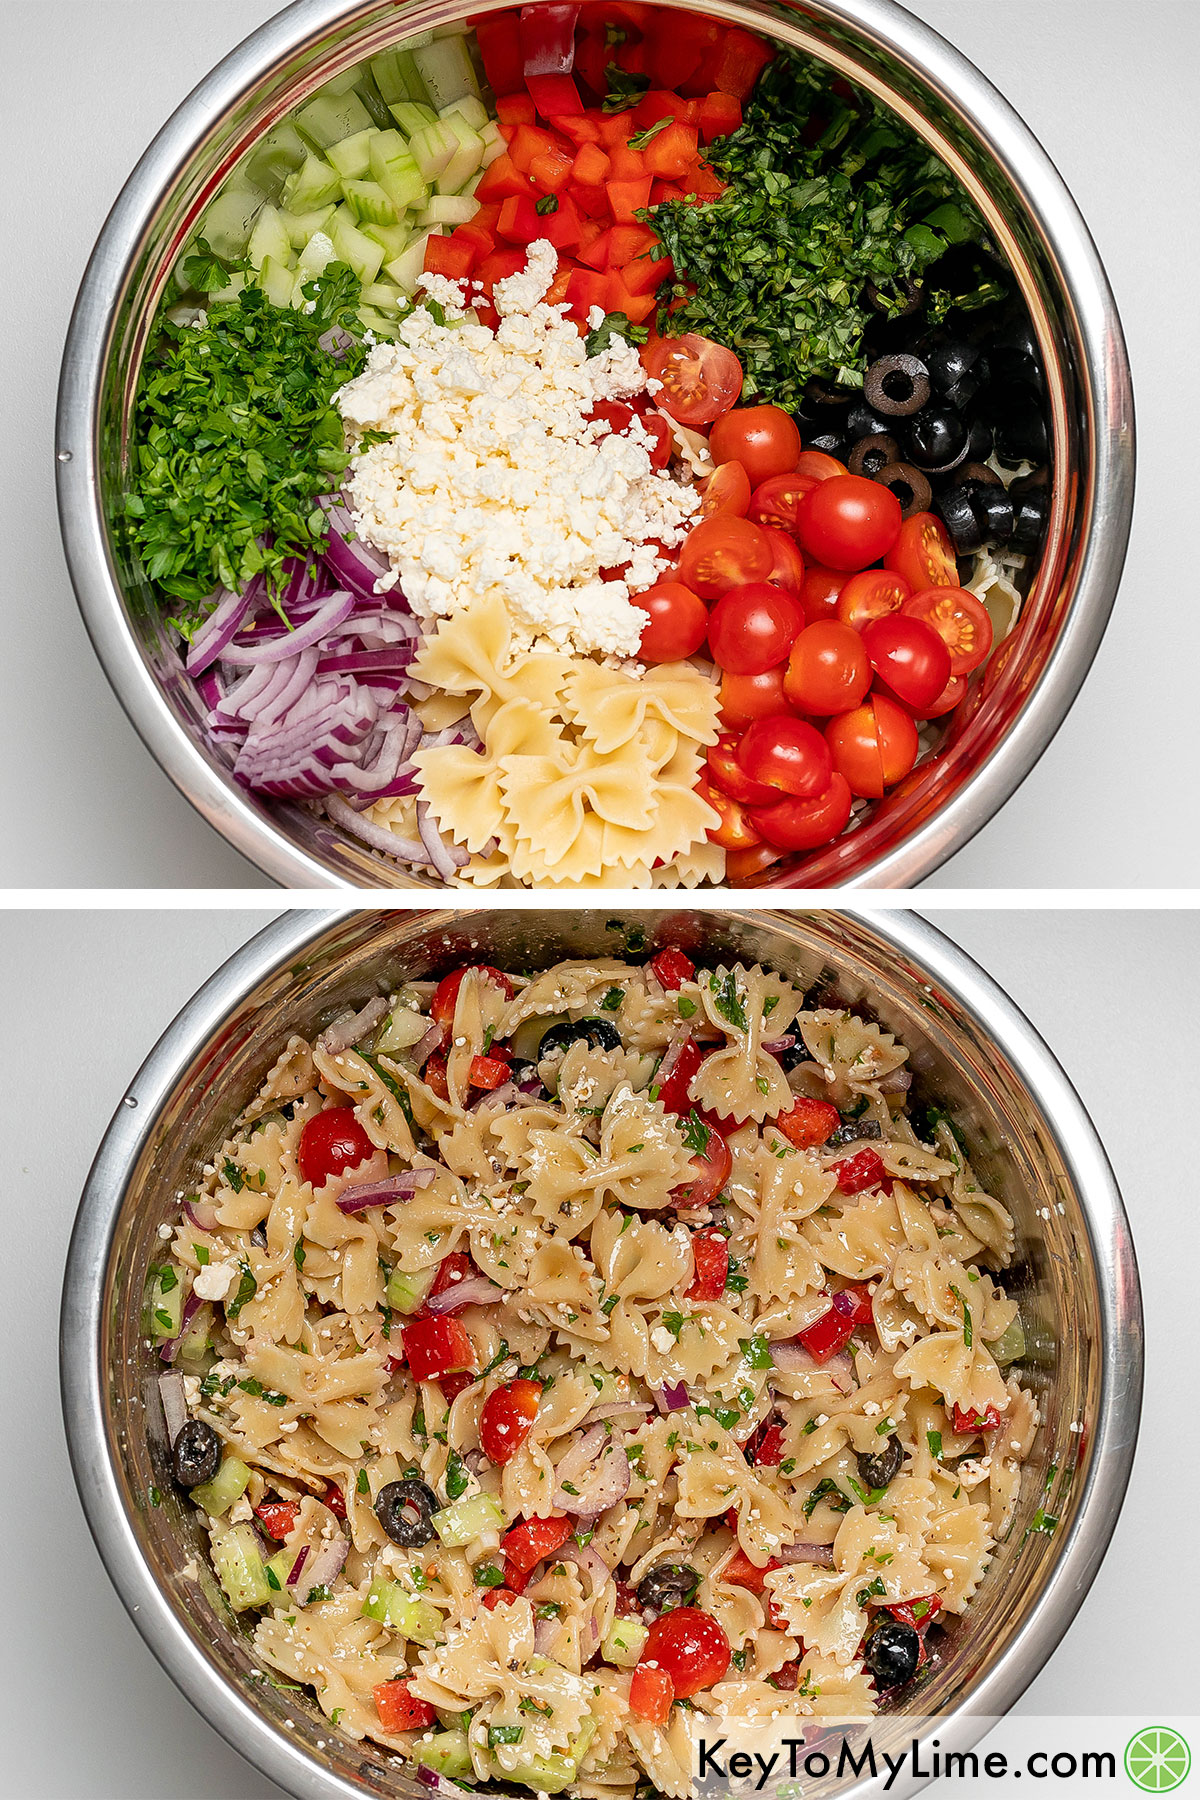 Adding the cooked pasta and chopped vegetables to a mixing bowl then tossing thoroughly with mixed the dressing.